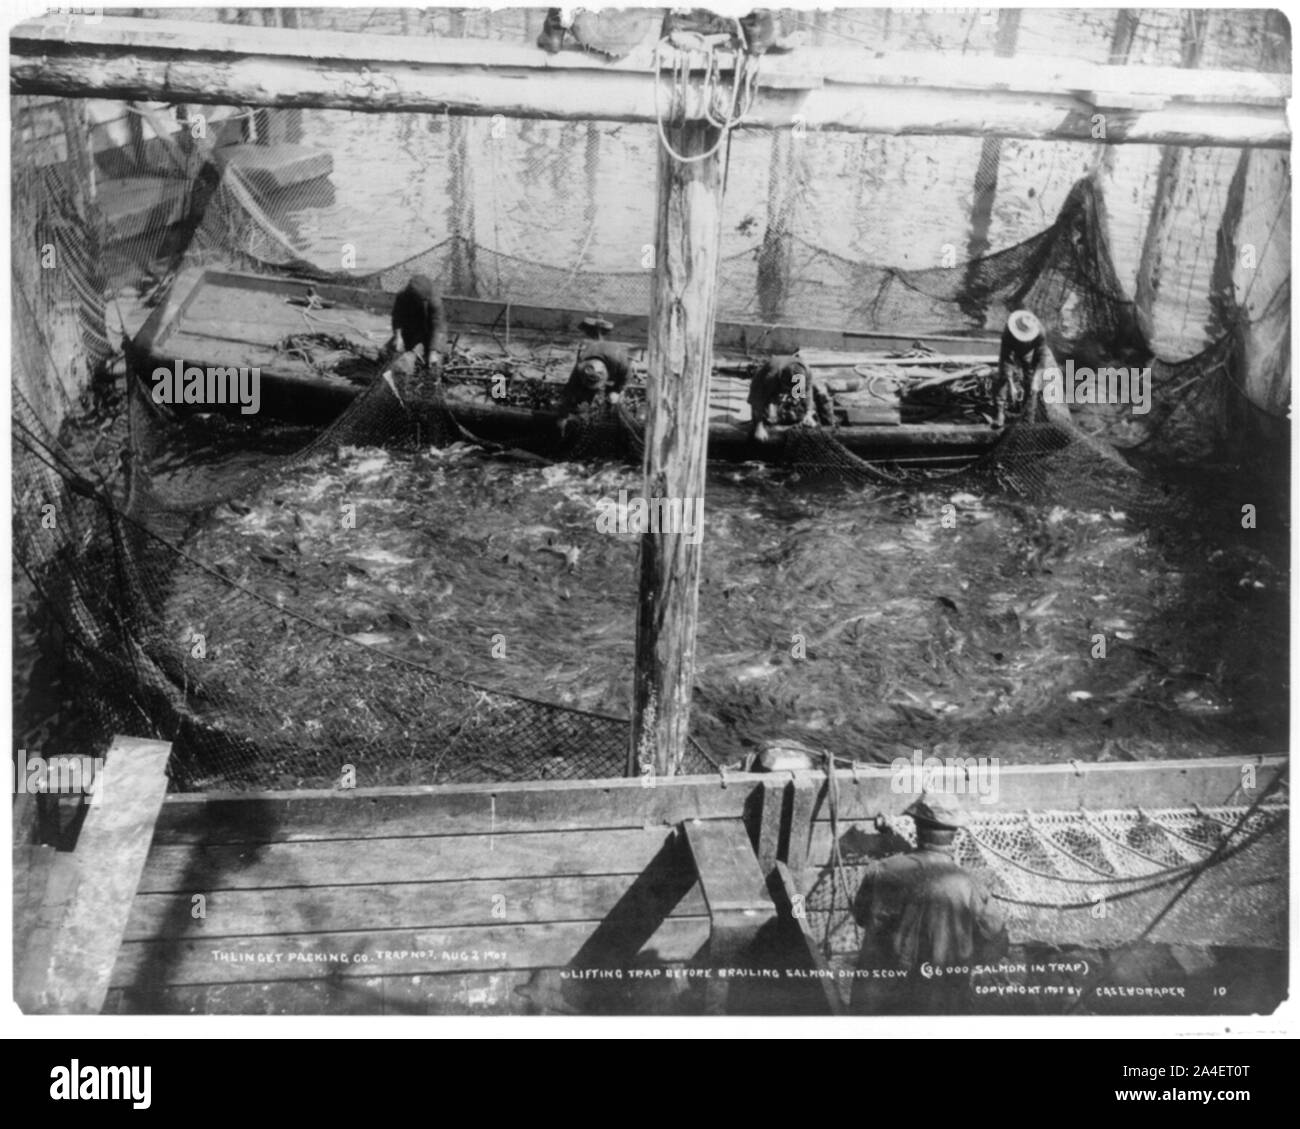 Thlinget Packing Co. trap no. 7, Aug. 2, 1907: Lifting trap before brailing salmon onto scow (36,000 salmon in trap) Stock Photo